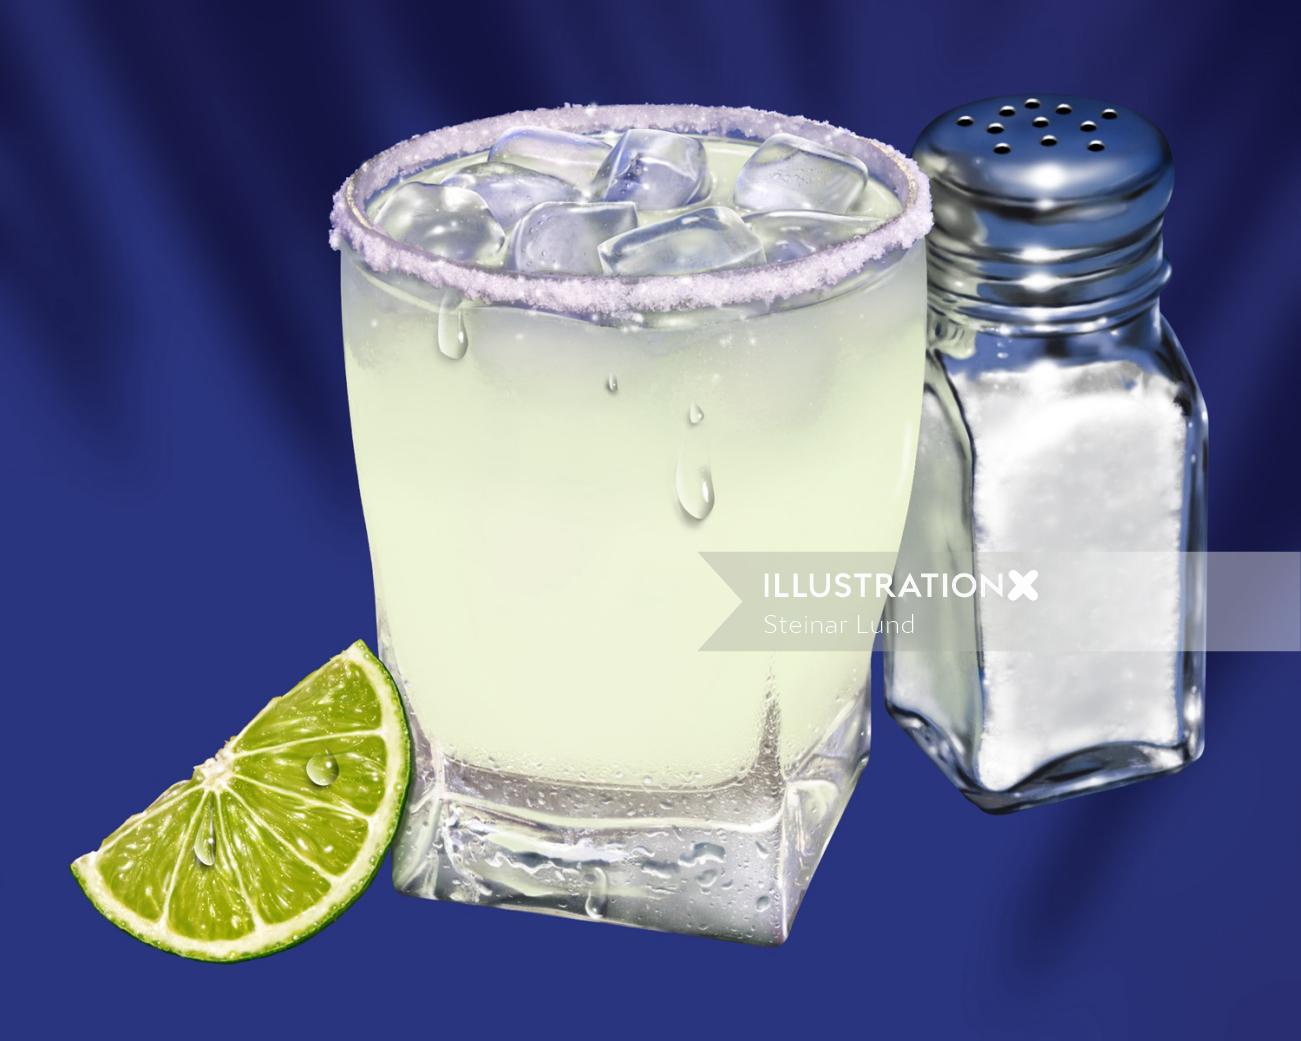 Glass of Margarita with slice of Lime and Salt shaker